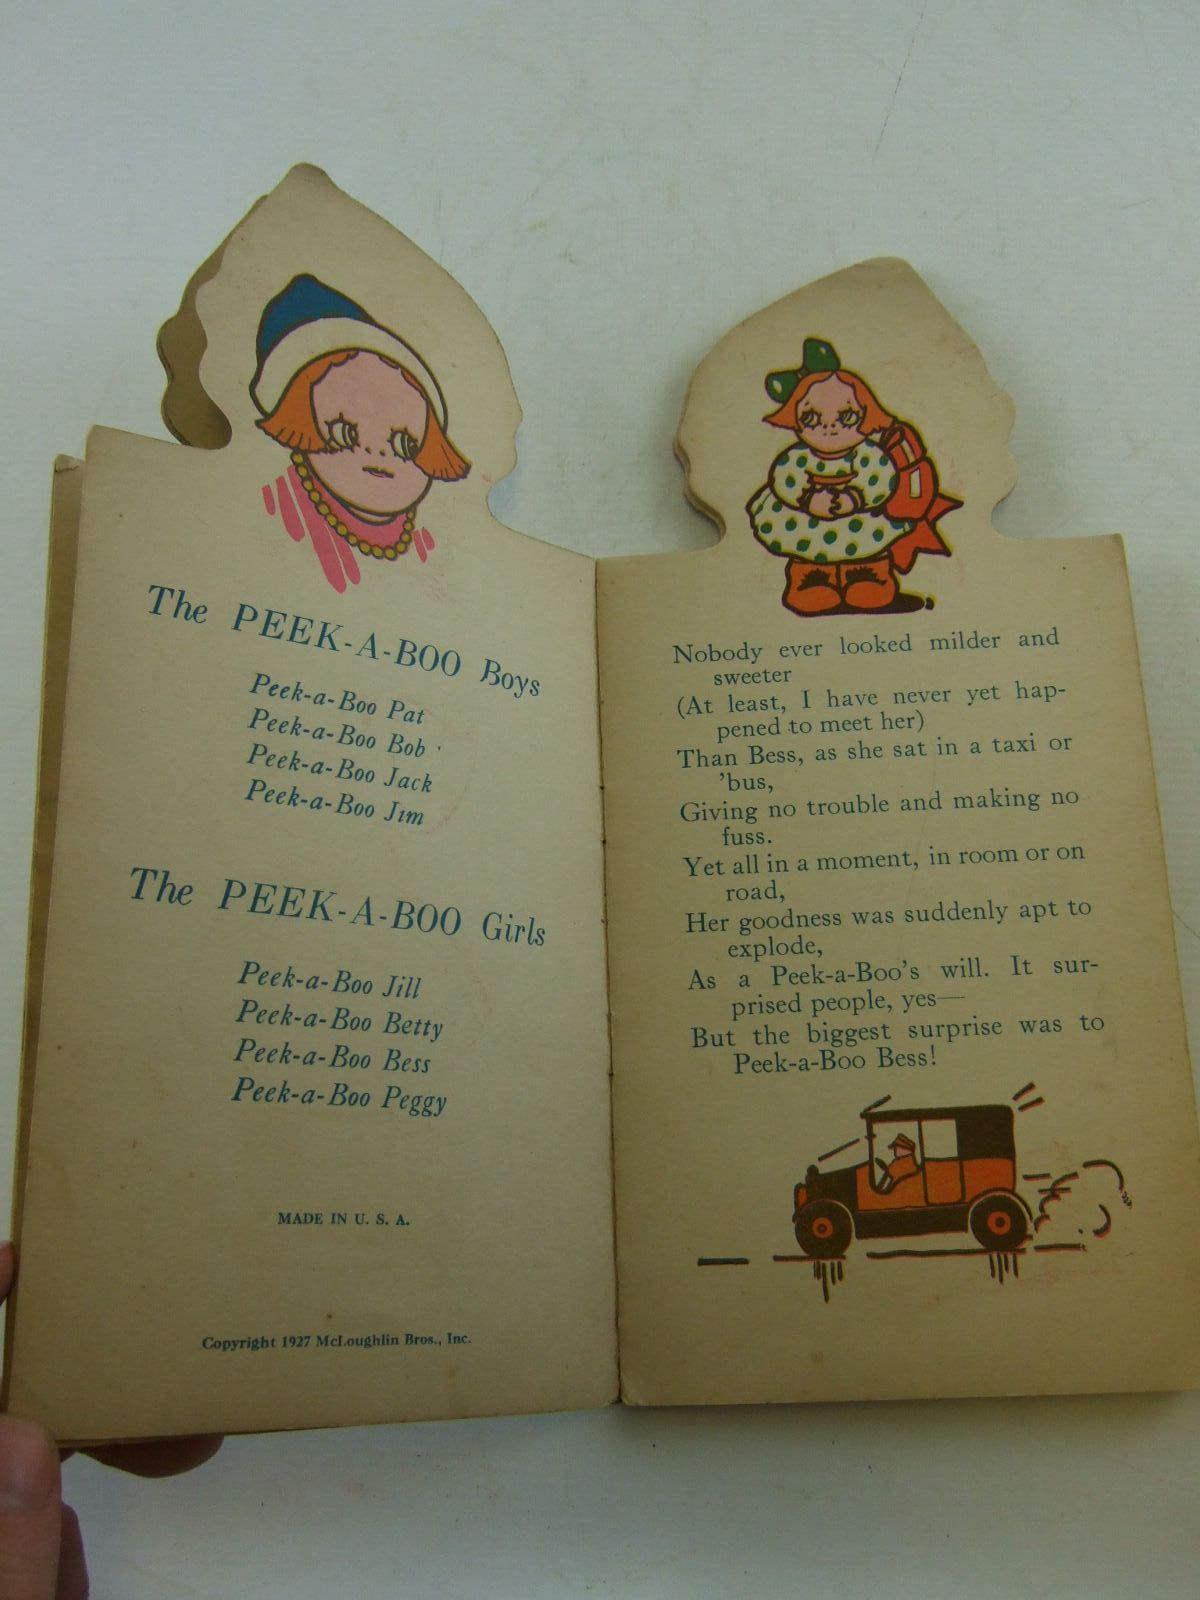 Photo of PEEK-A-BOO BESS written by Preston, Chloe illustrated by Preston, Chloe published by McLoughlin Bros. (STOCK CODE: 2107906)  for sale by Stella & Rose's Books